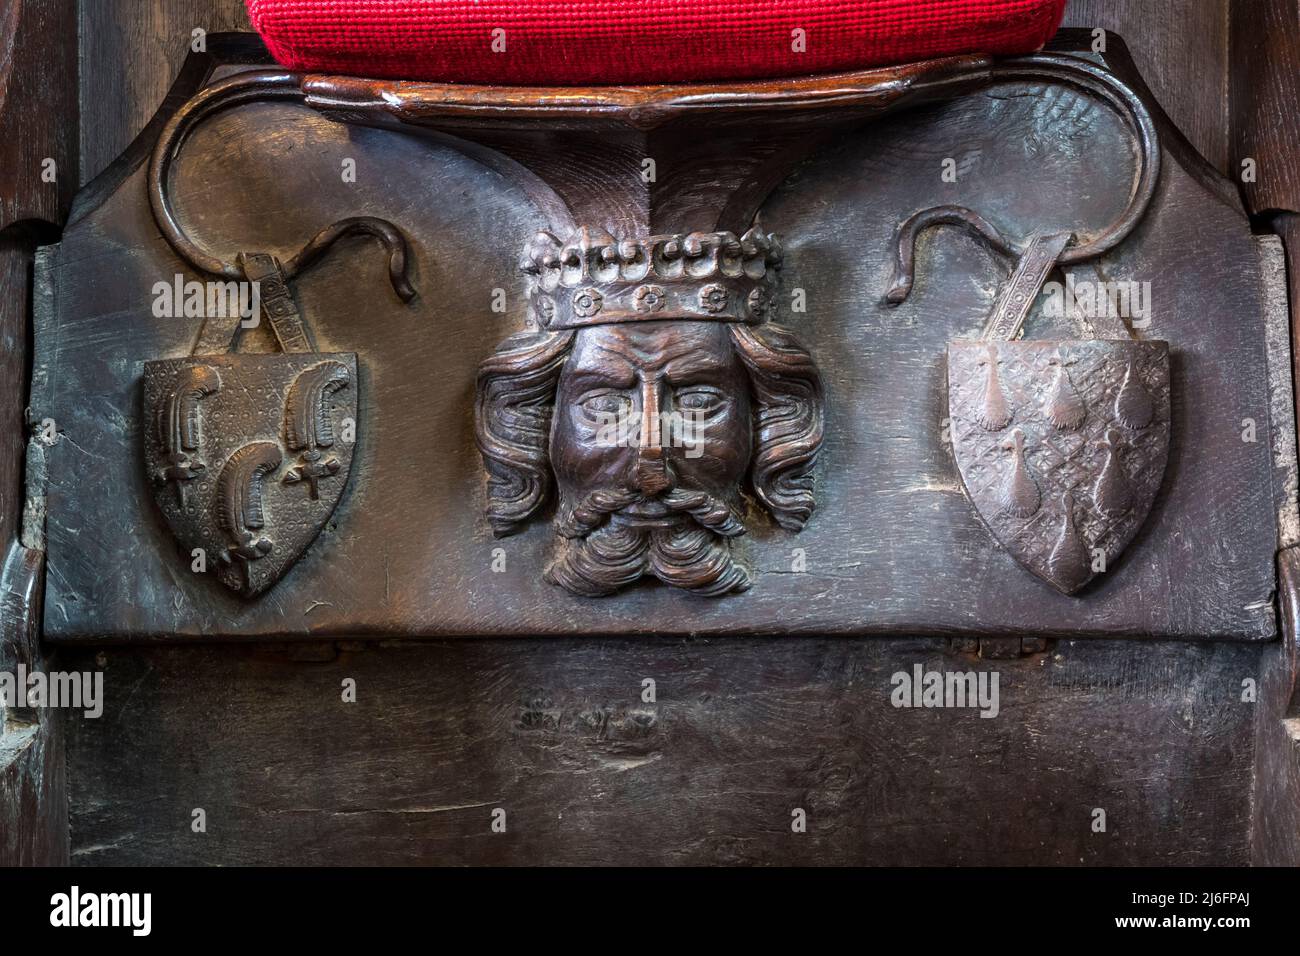 14th century misericord in St Margaret's church, King's Lynn.  Features carving of the head of Edward the Black Prince. Stock Photo